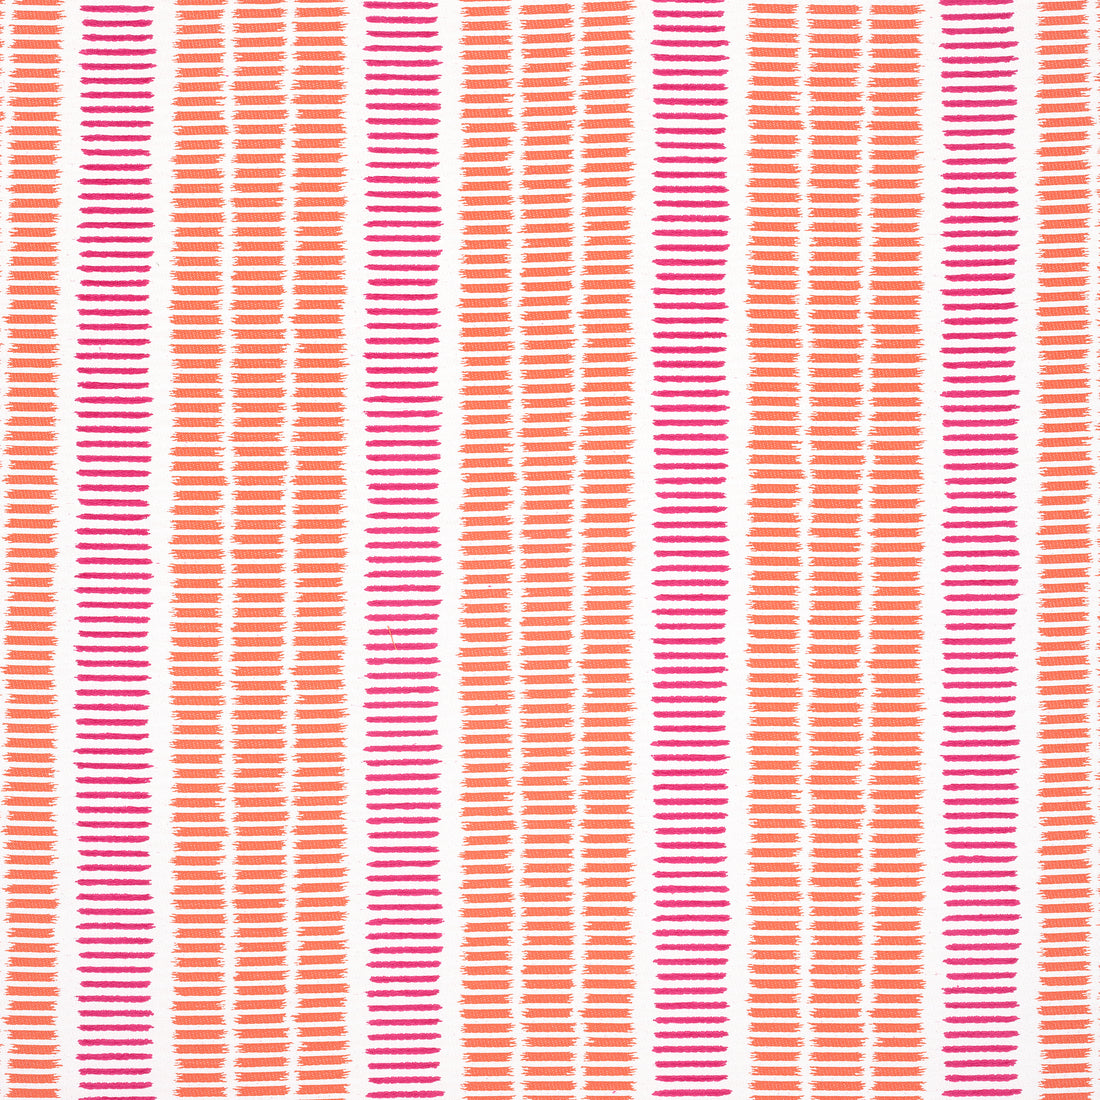 Topsail Stripe fabric in coral and peony color - pattern number W73512 - by Thibaut in the Landmark collection